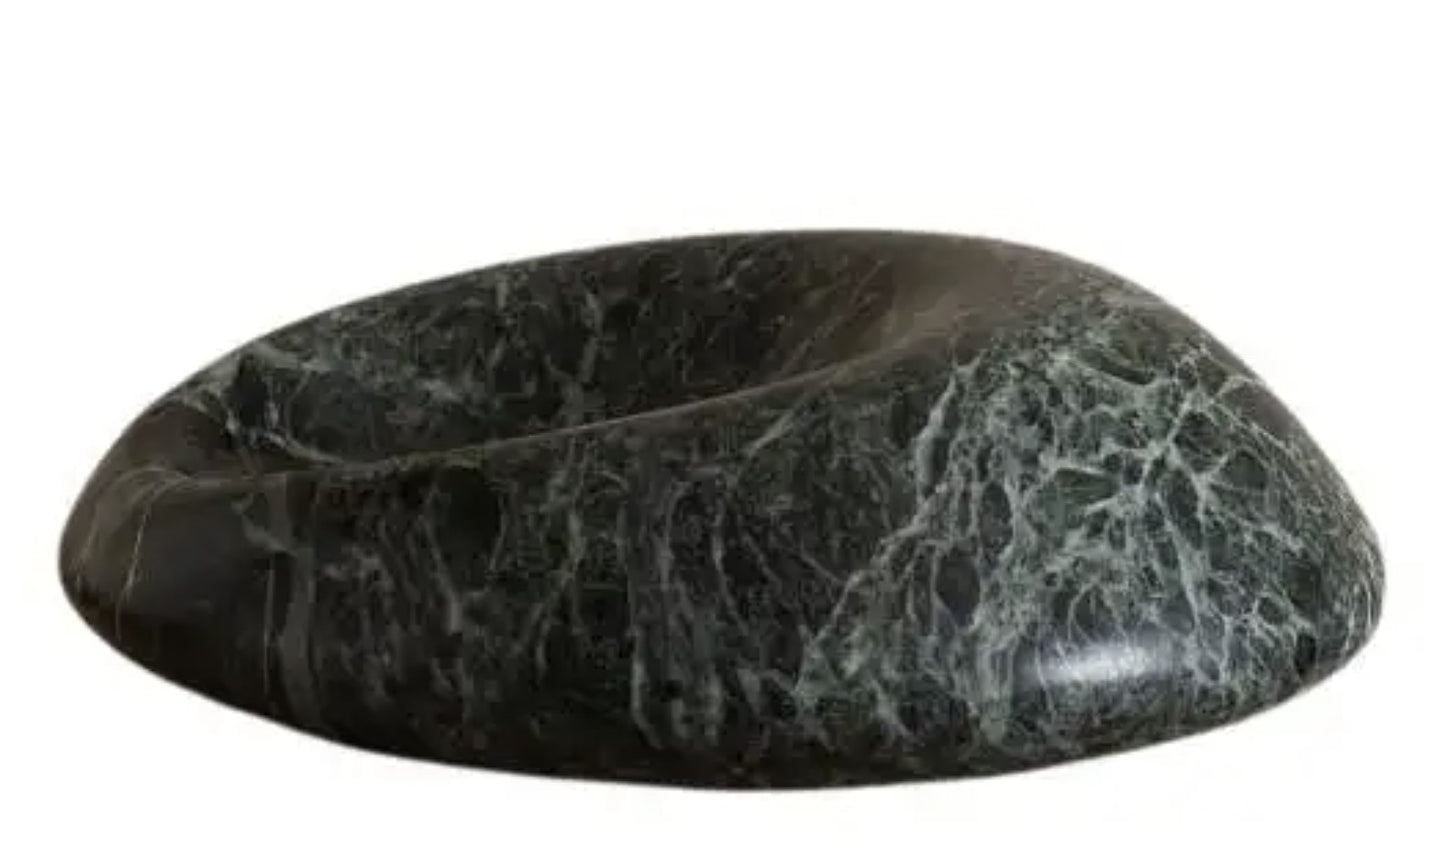 Cetus Green Marble Candle Holder - $1,450.00